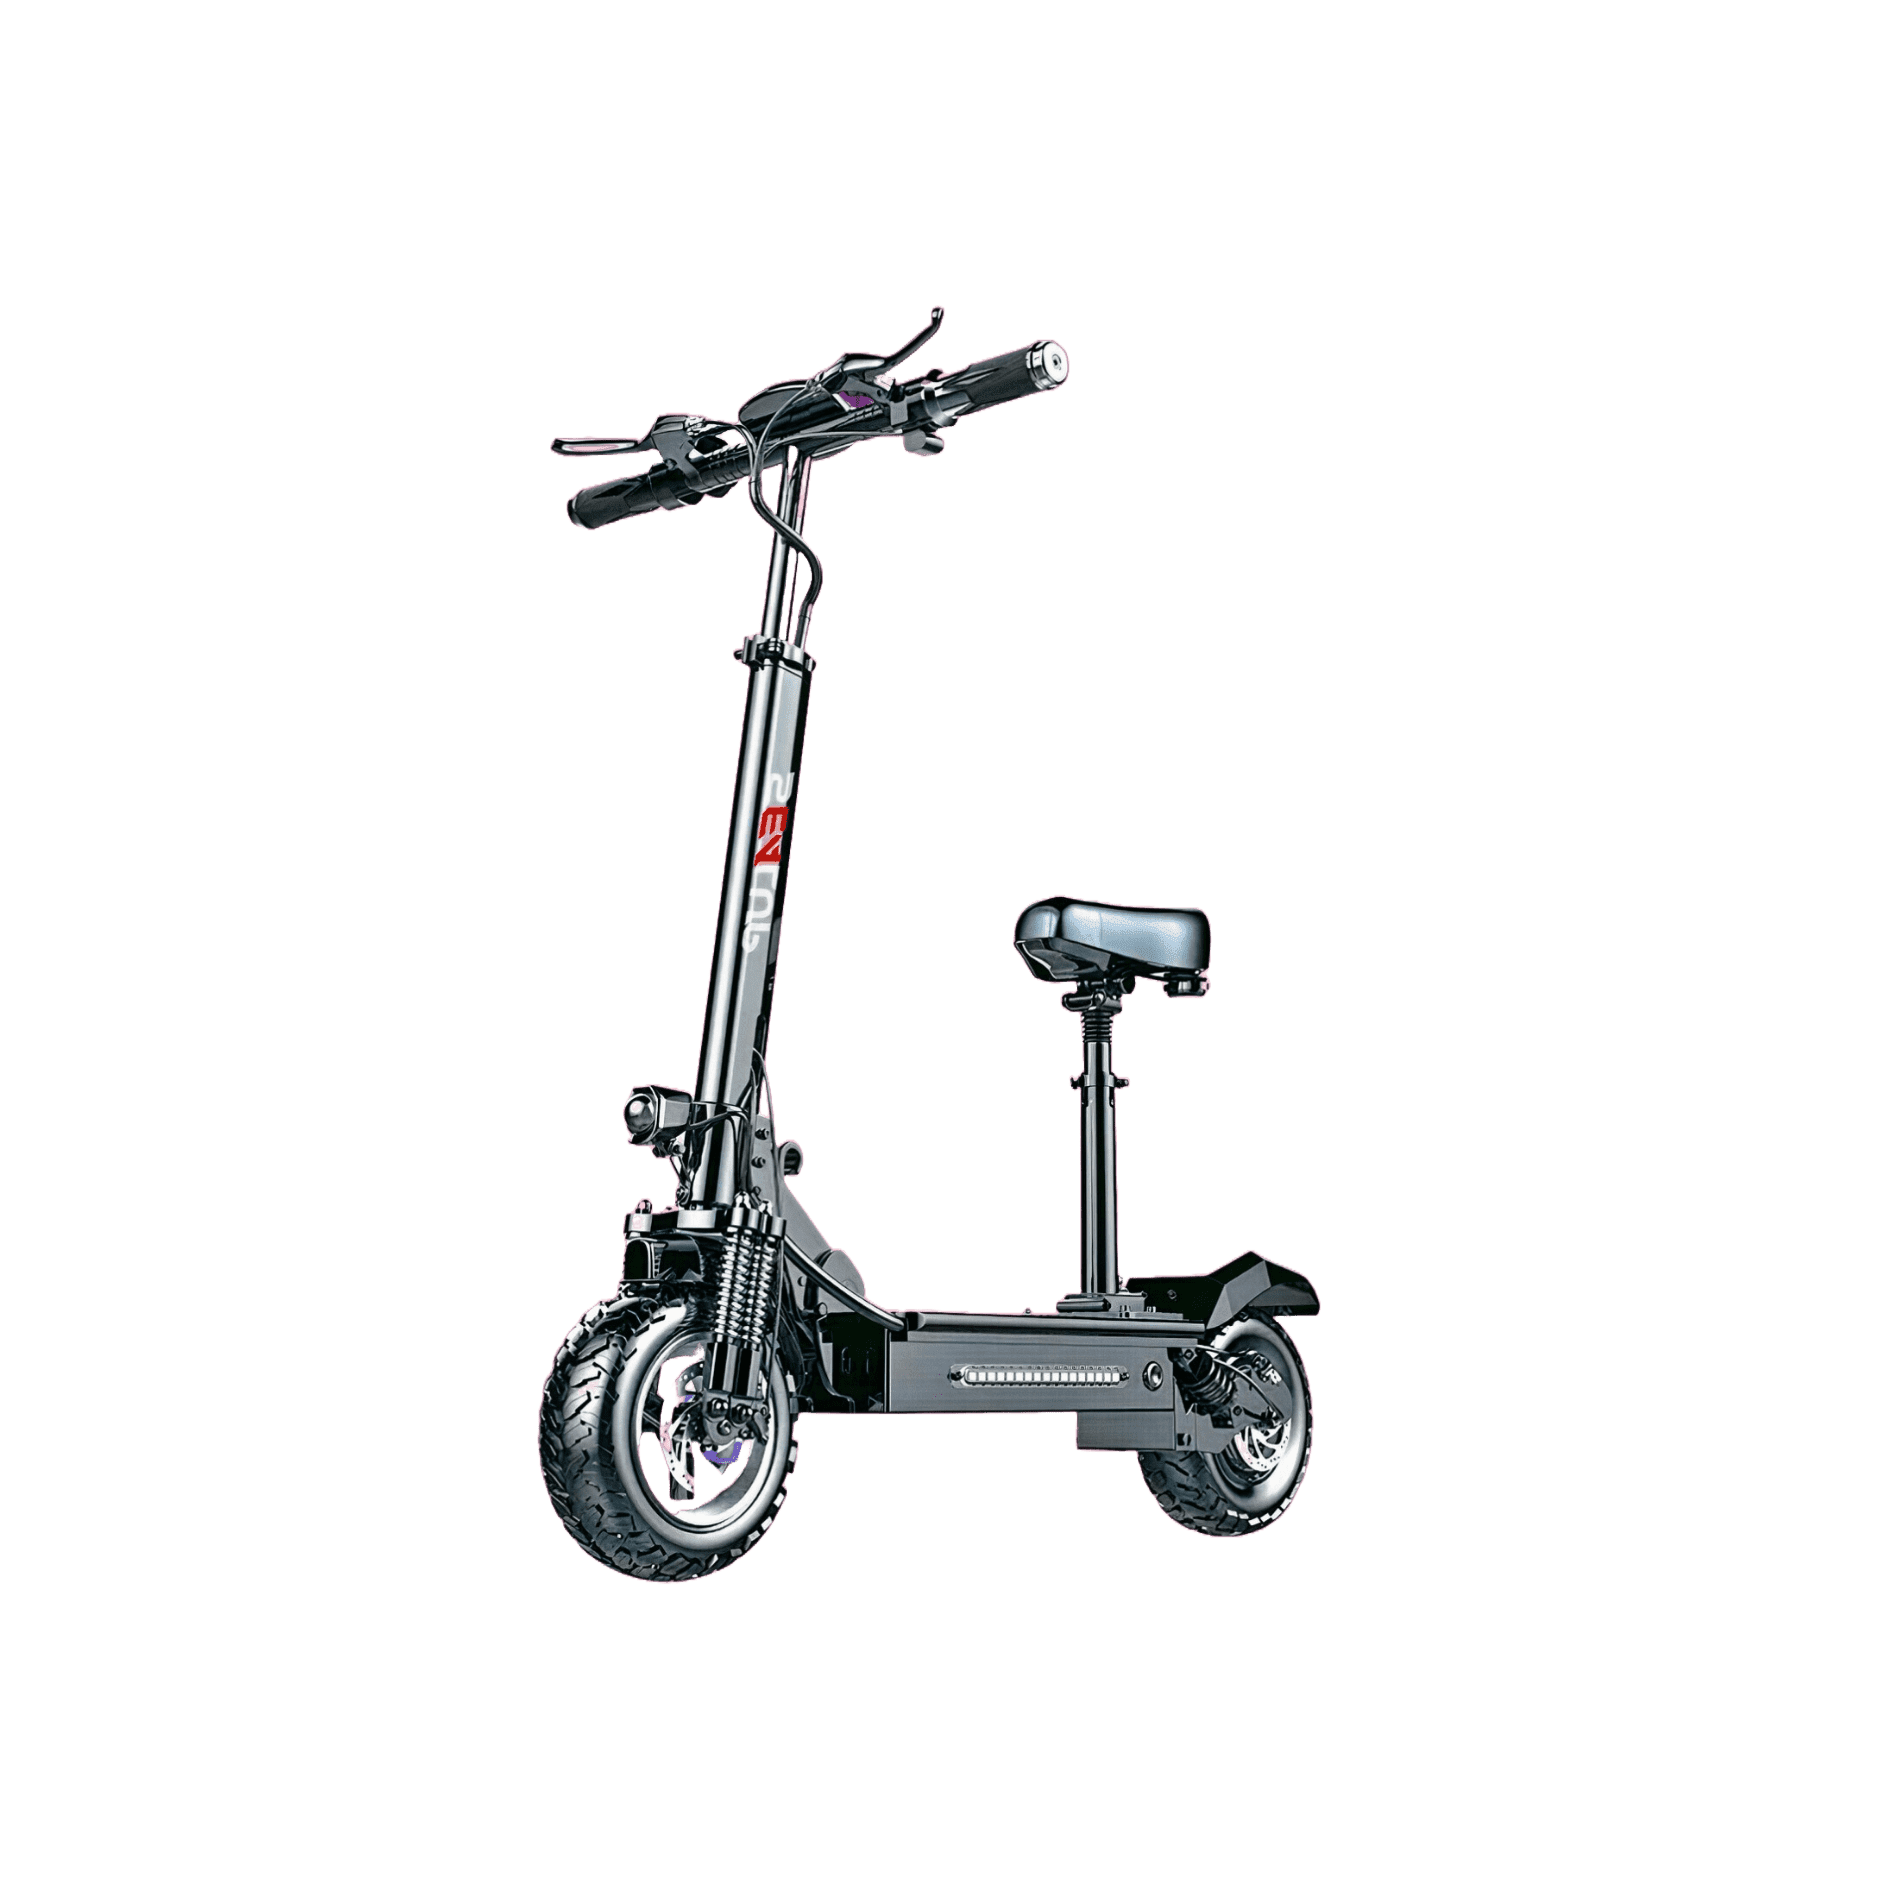 SEALUP S9 ELECTRIC SCOOTER - ScootiBoo